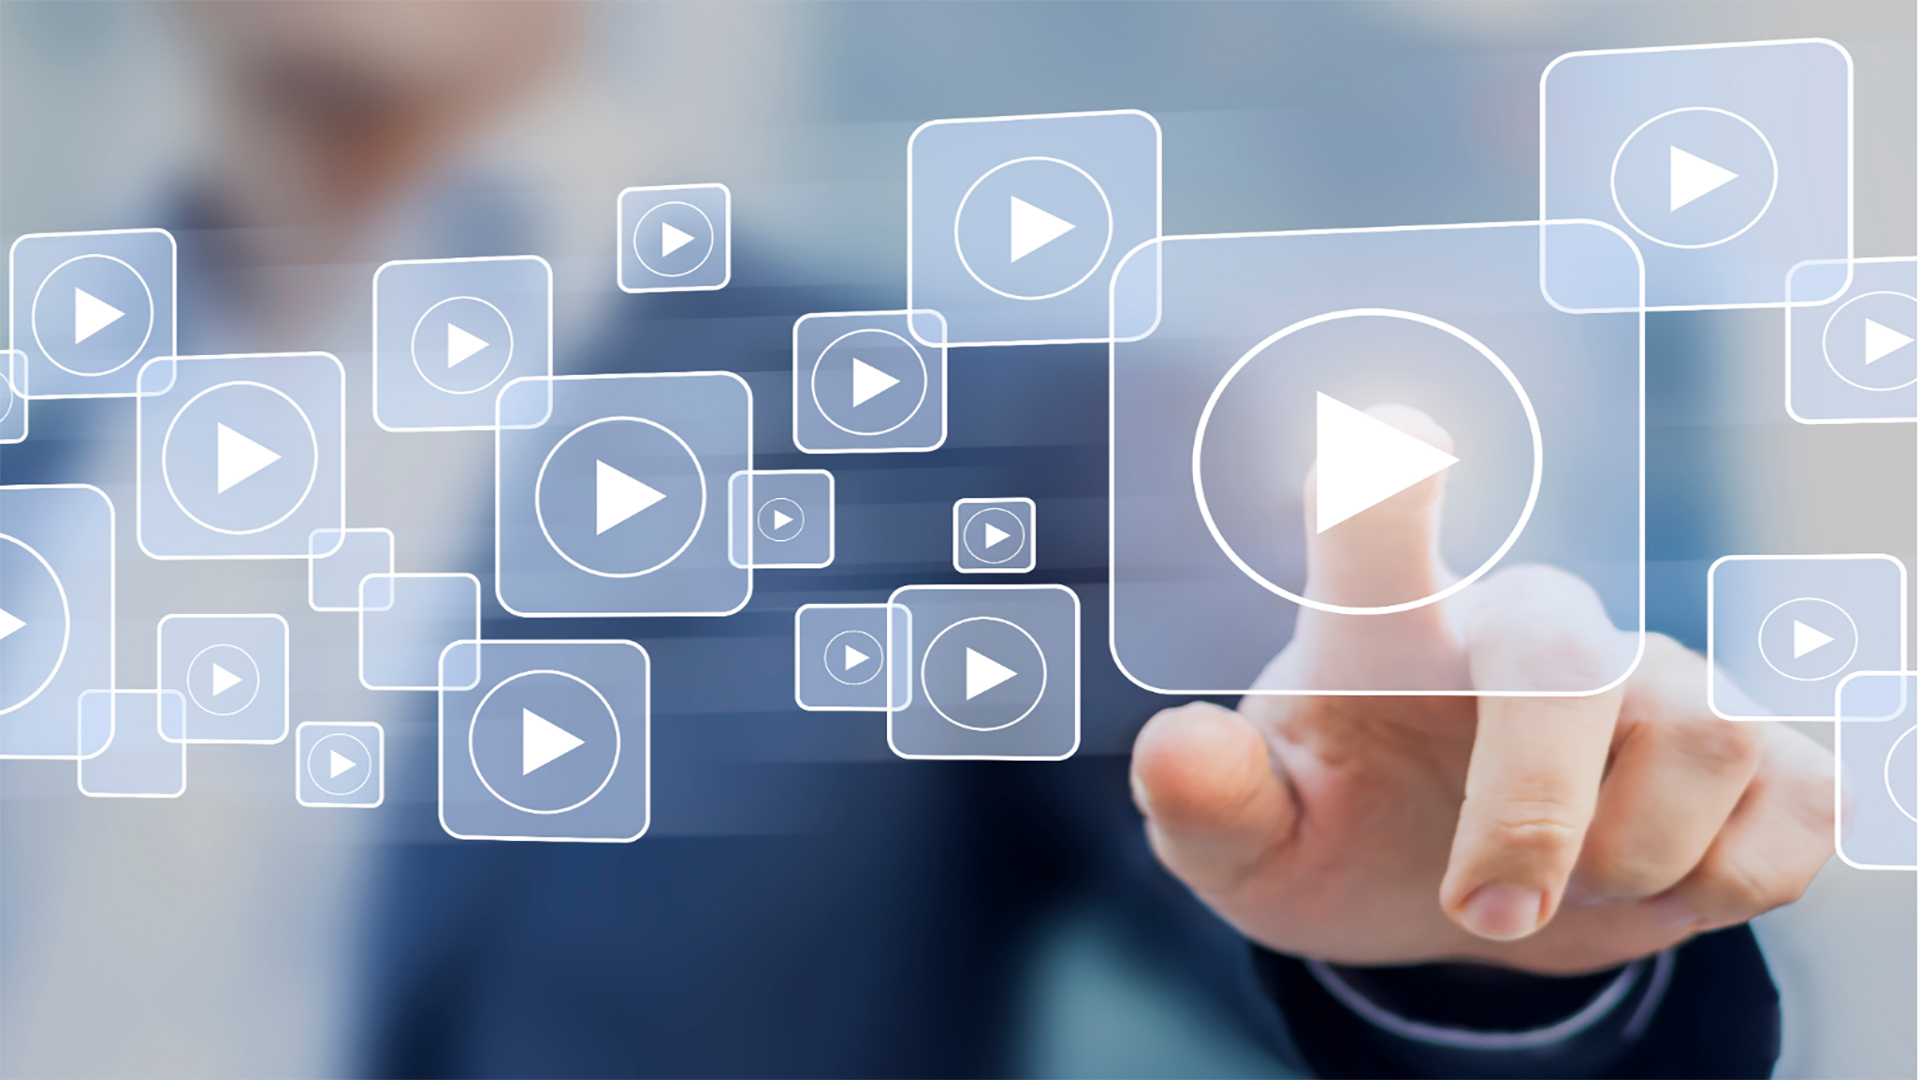 3 Strategies for Using Video Content to Drive Traffic to Amazon